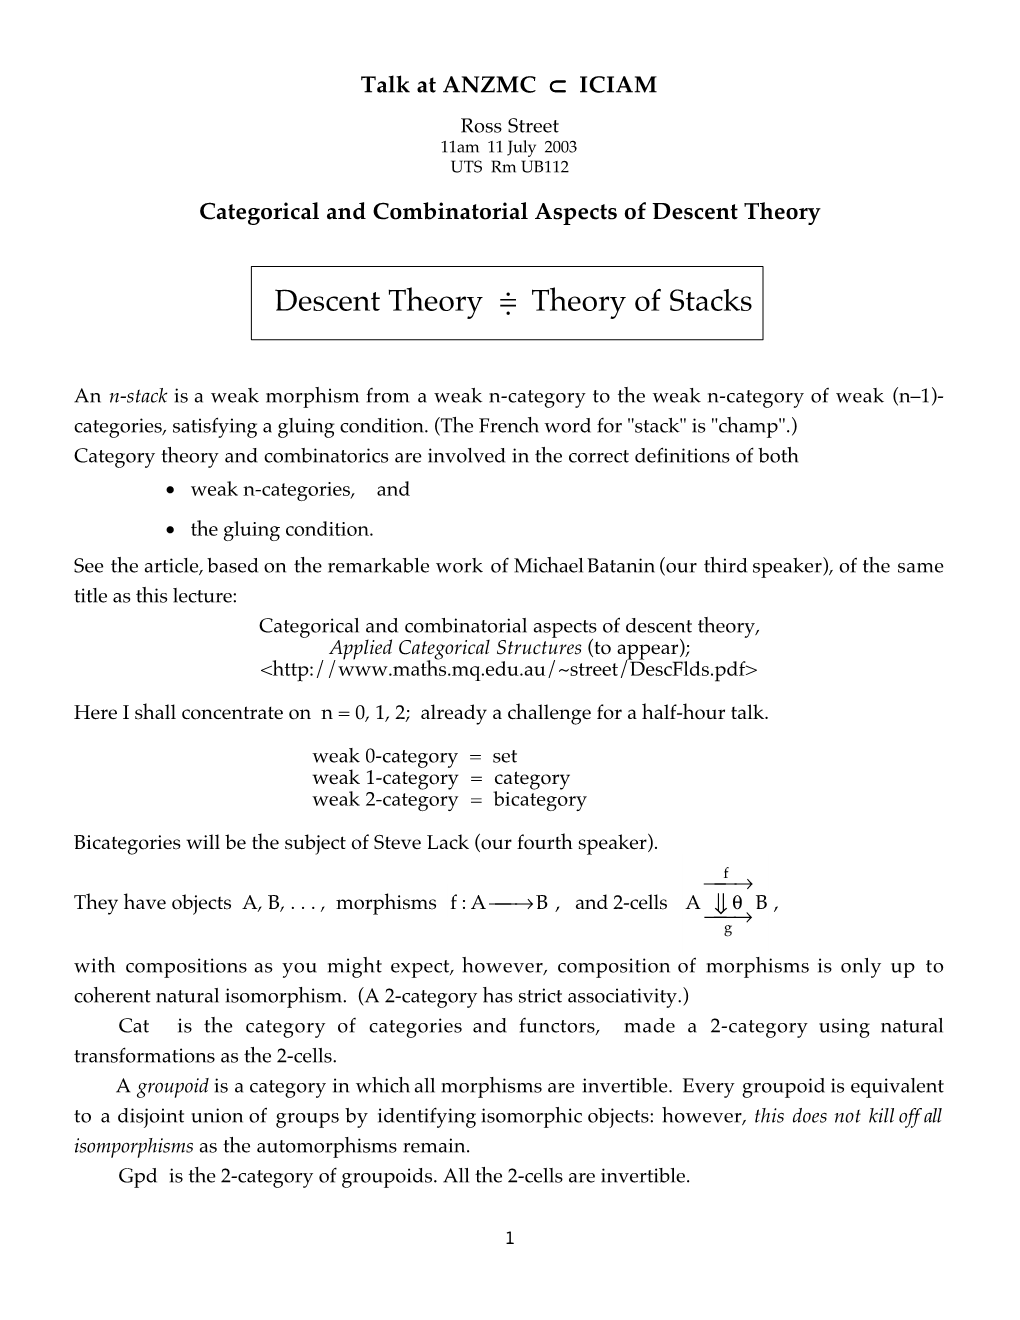 Descent Theory Theory of Stacks =.